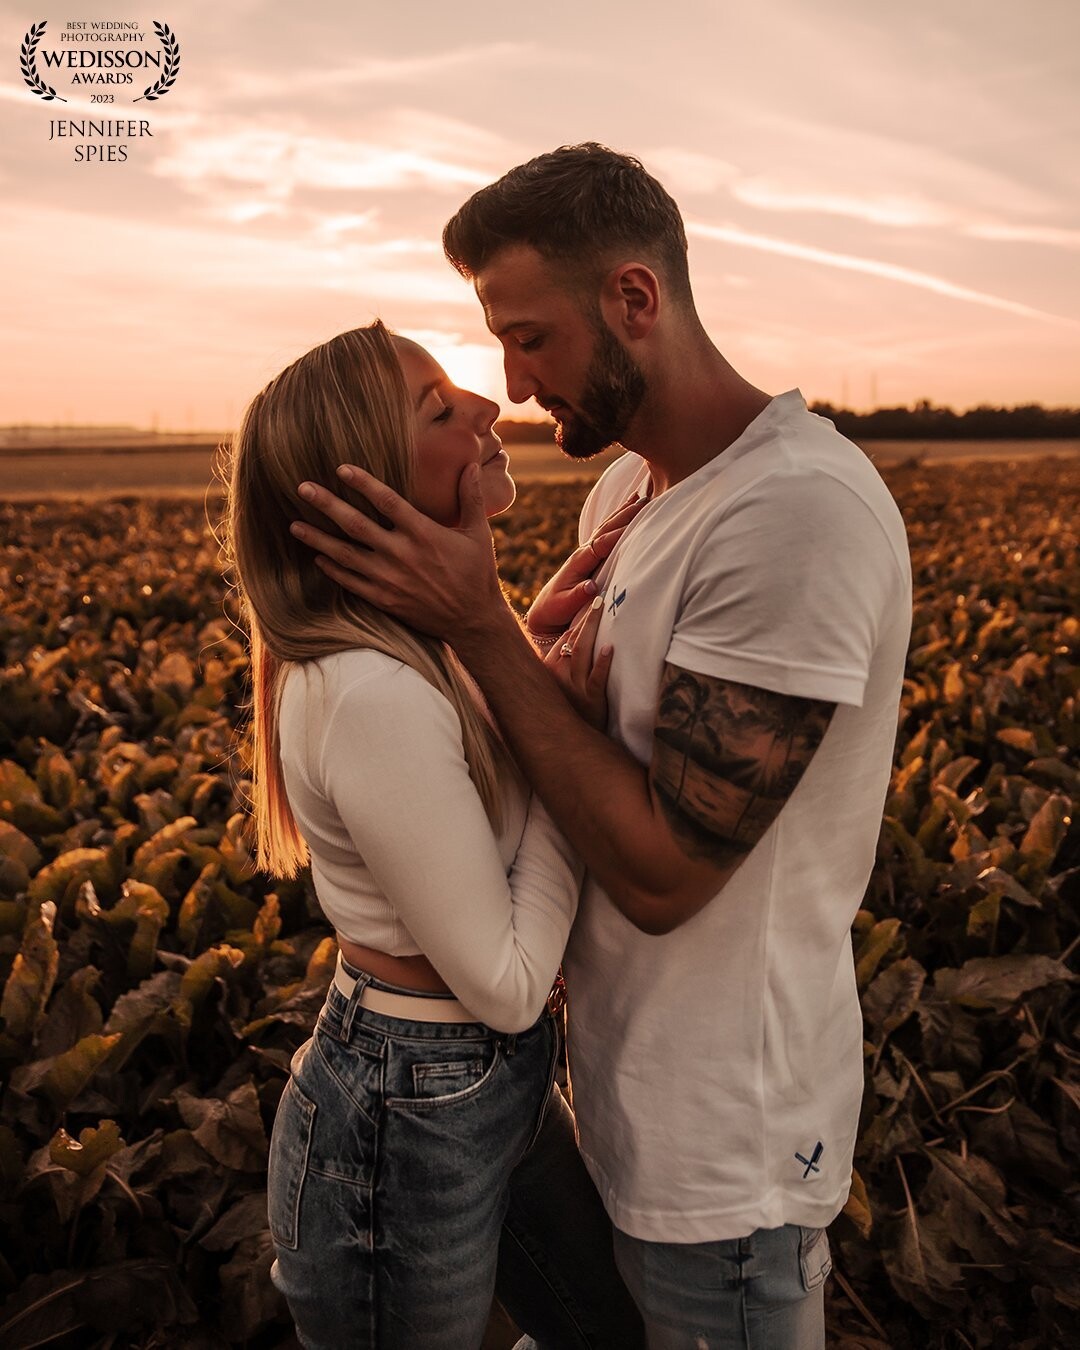 The best thing about a shooting is when the couple forgets the camera and just focuses on themselves. This photo was taken at that moment during the golden hour.